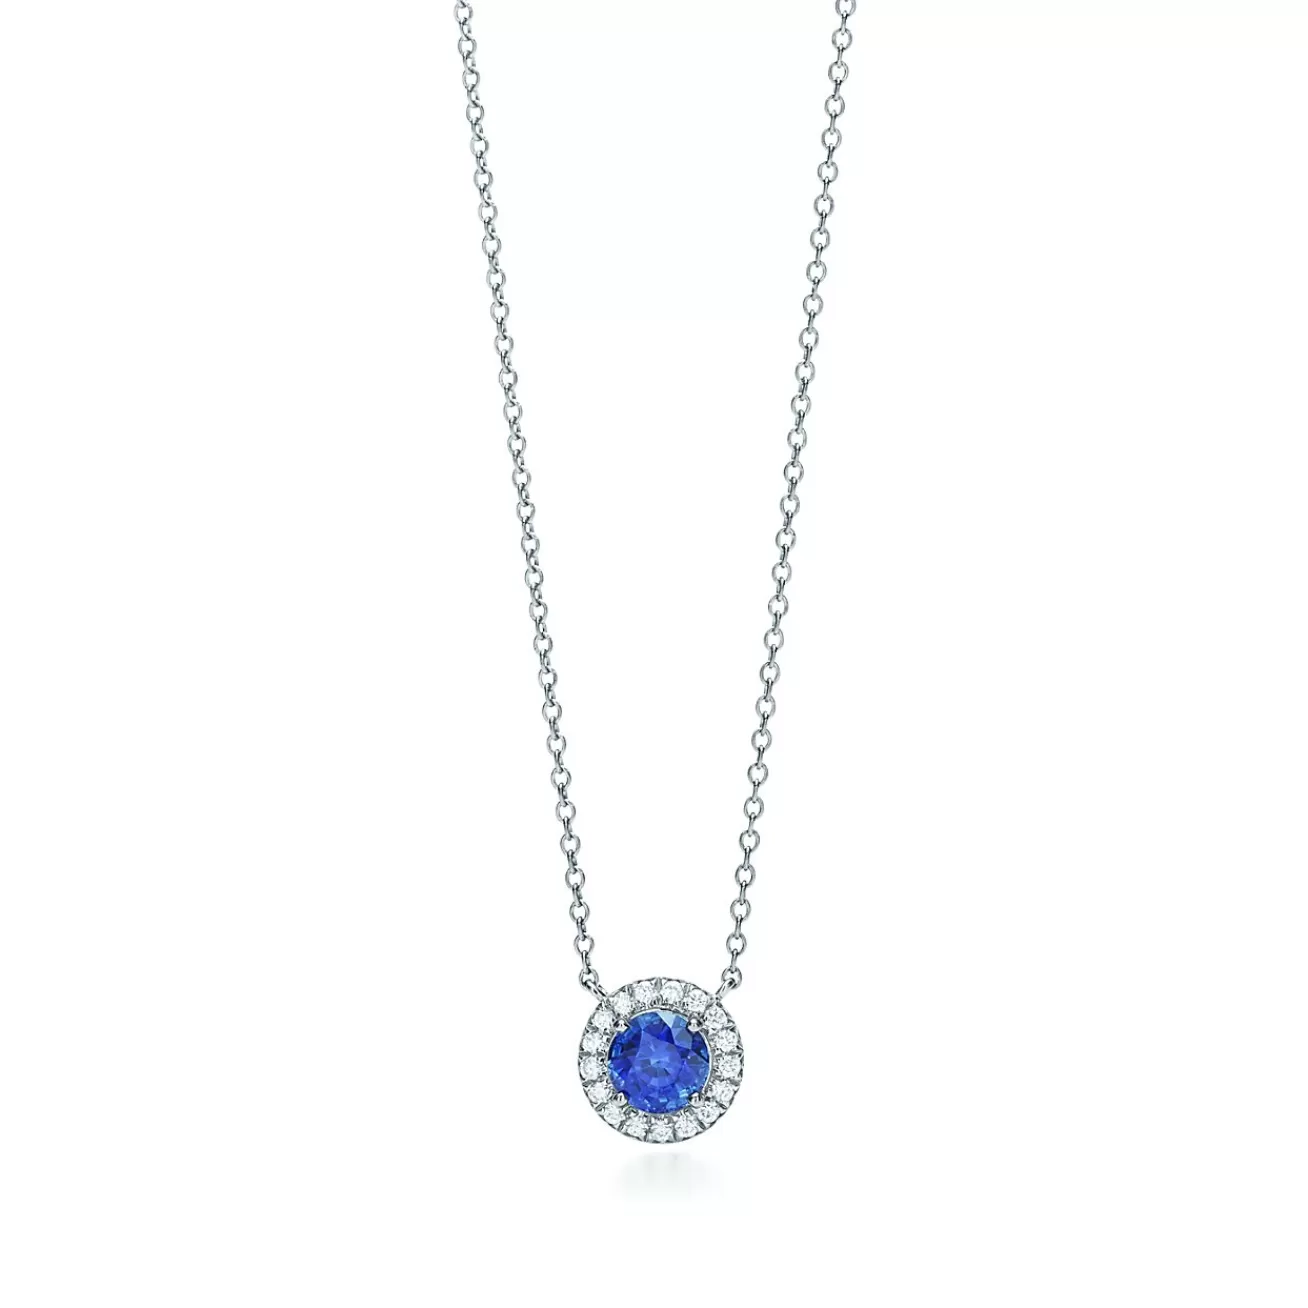 Tiffany & Co. Tiffany Soleste® pendant in platinum with a sapphire and diamonds. | ^ Necklaces & Pendants | Gifts for Her